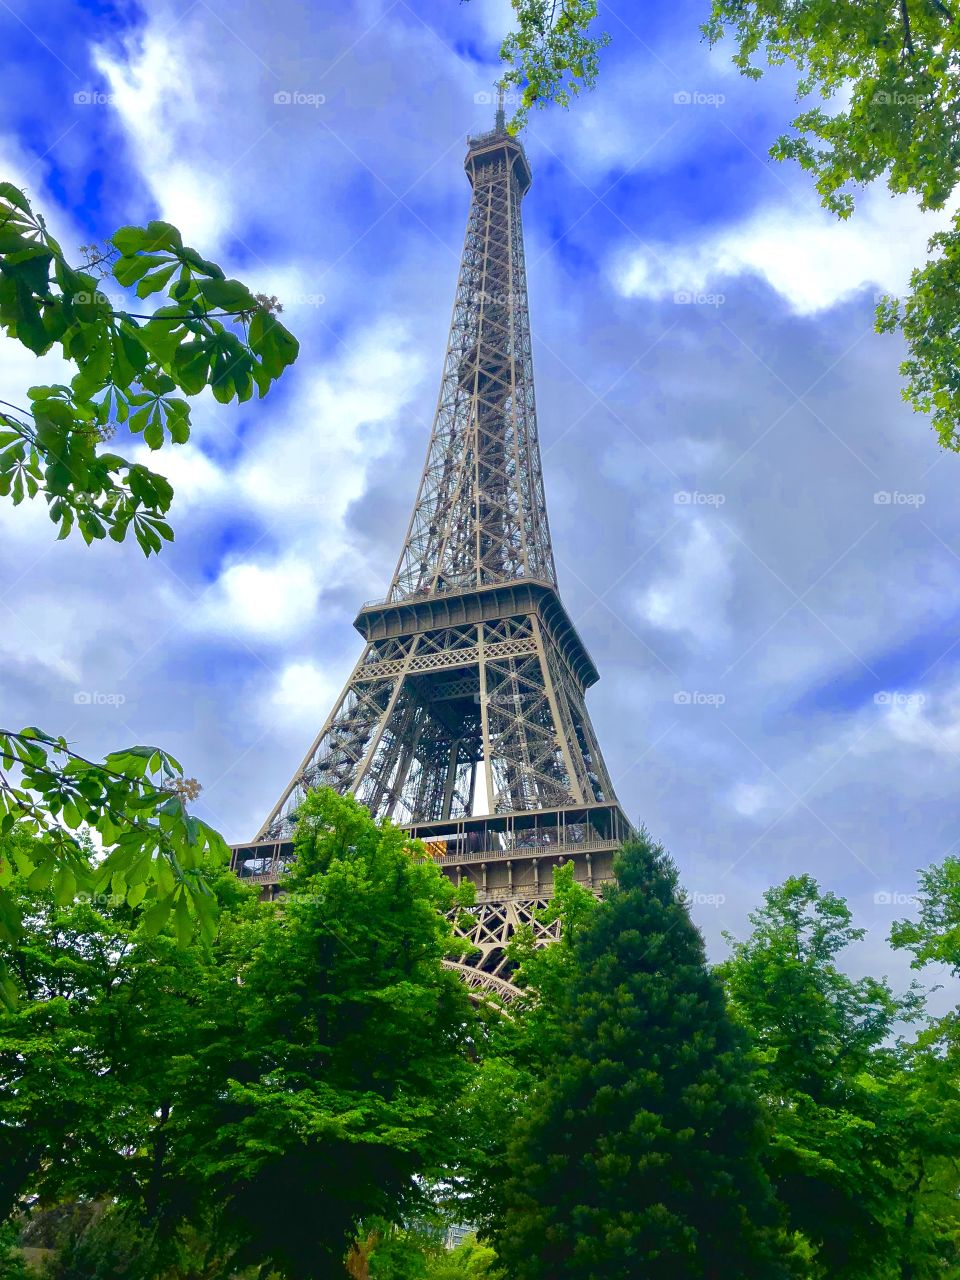 Tree lined view of the Eiffel Tower on a cloud covered day in Paris, France